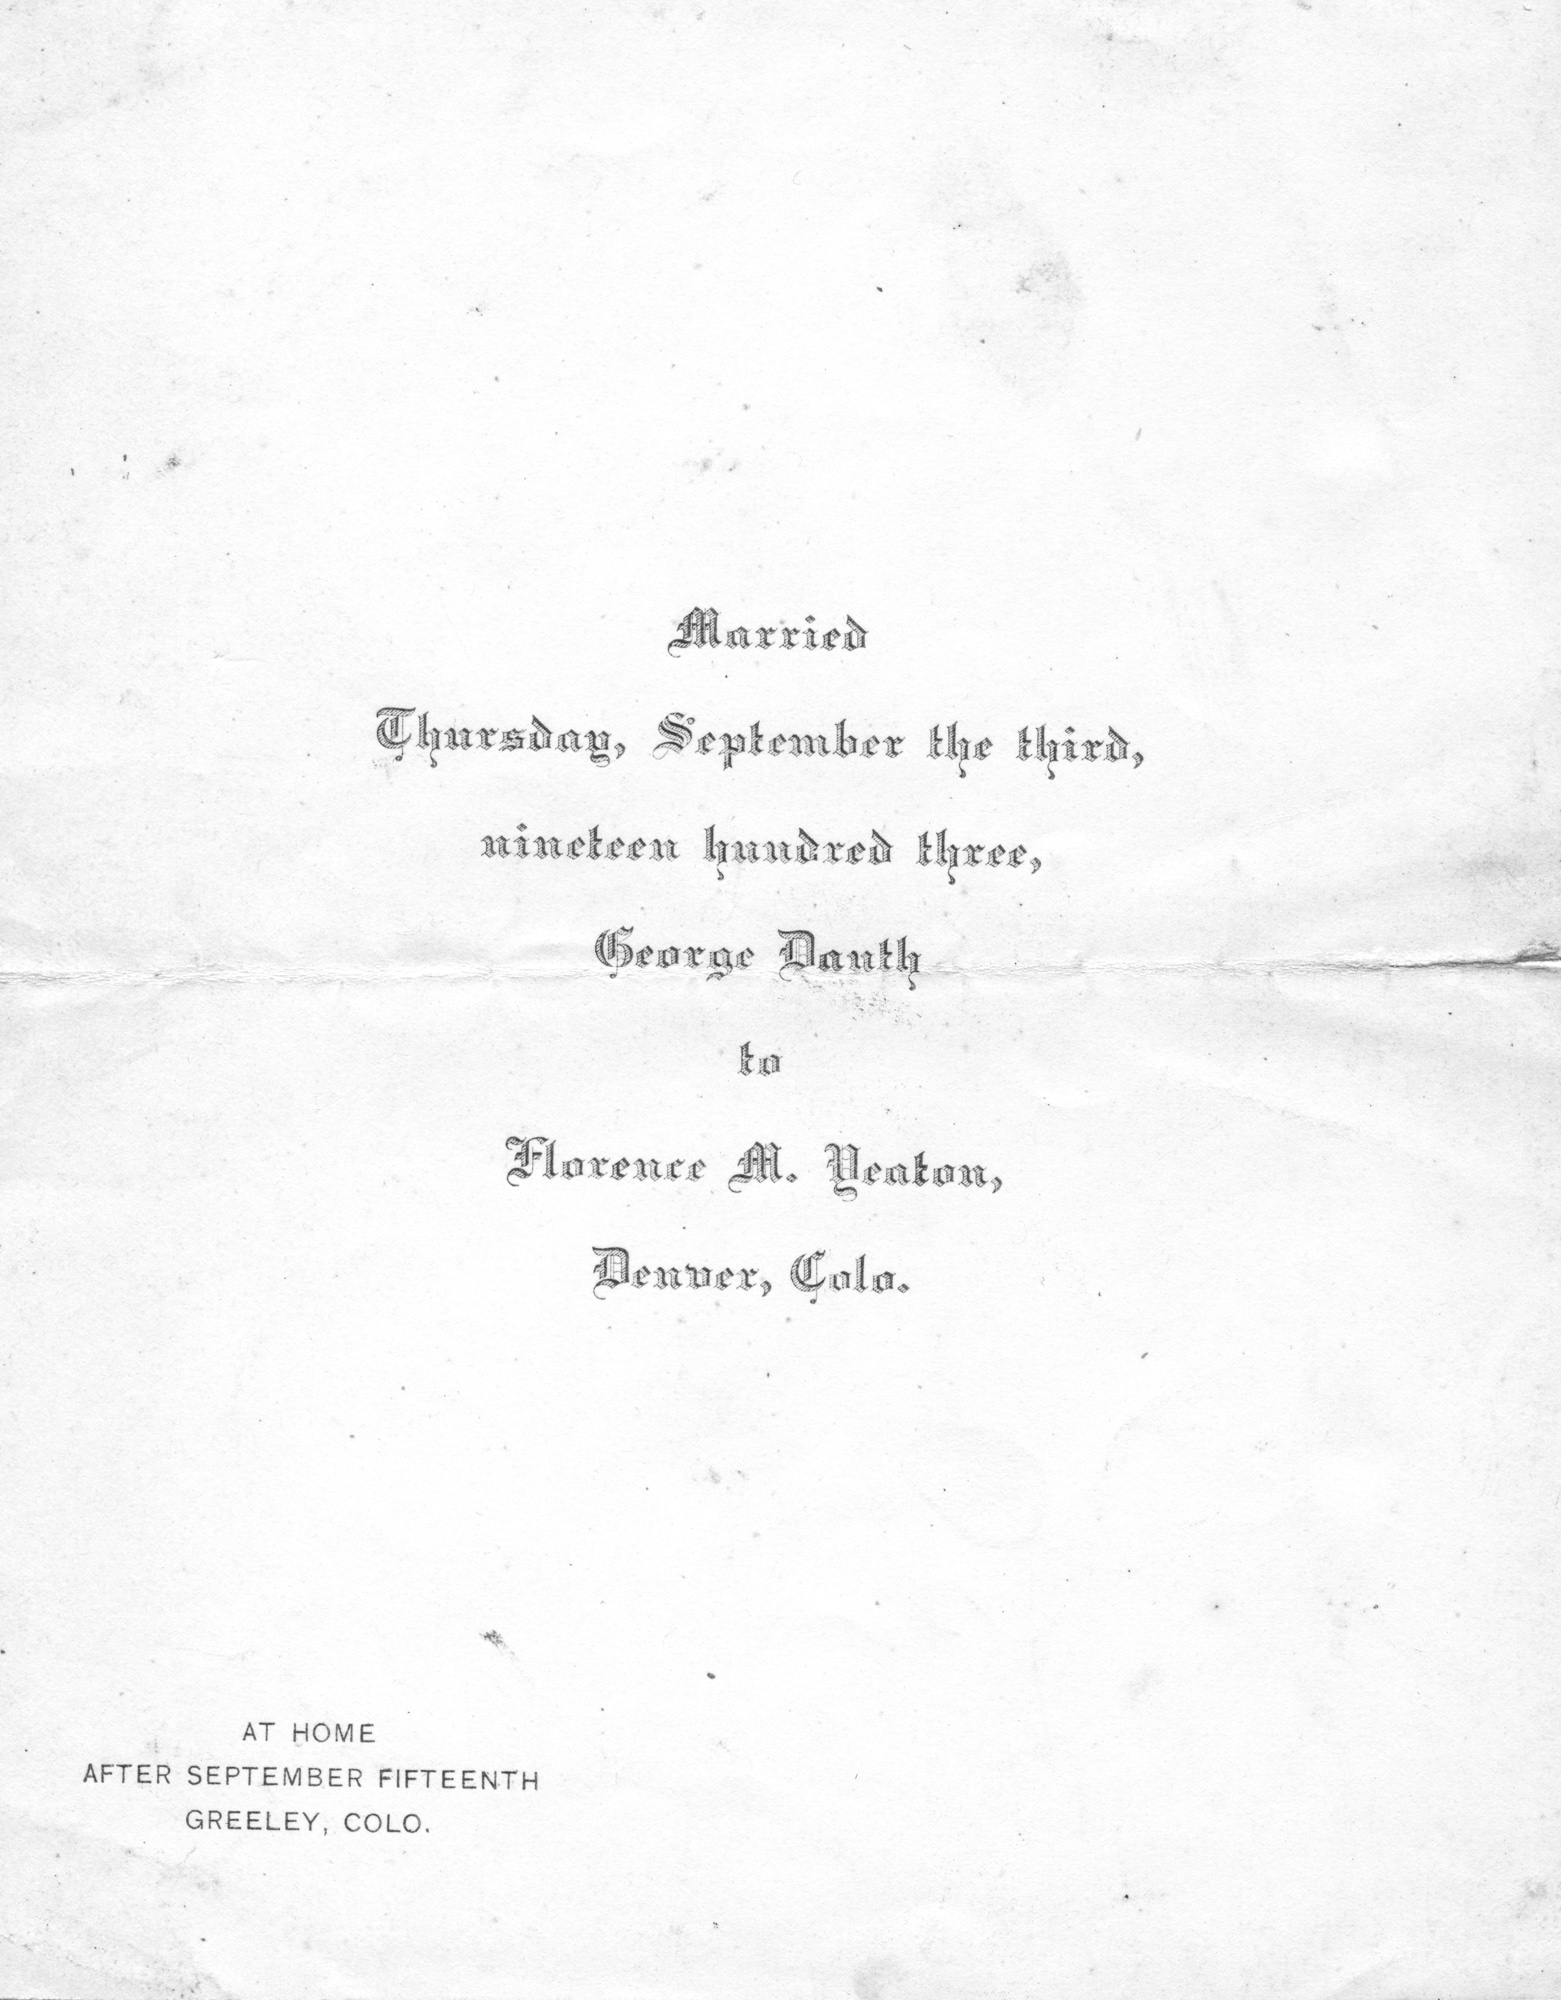 Dauth Family Archive - 1903-09-03 - Marriage Announcement Of George Dauth and Florence Yeaton